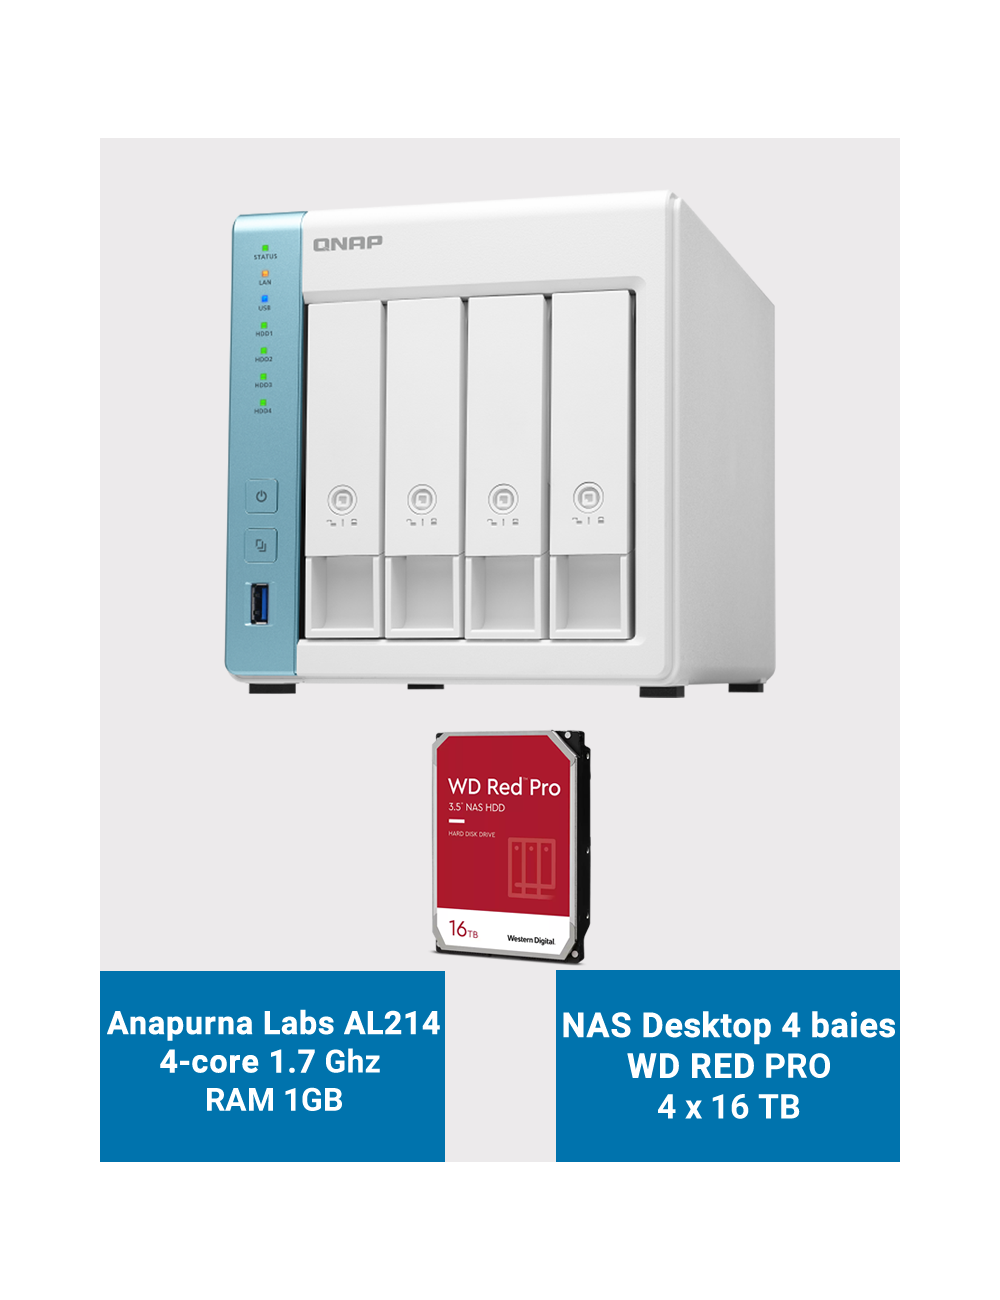 Qnap TS-431K Serveur NAS 4 baies WD RED PRO 64To (4x16To)